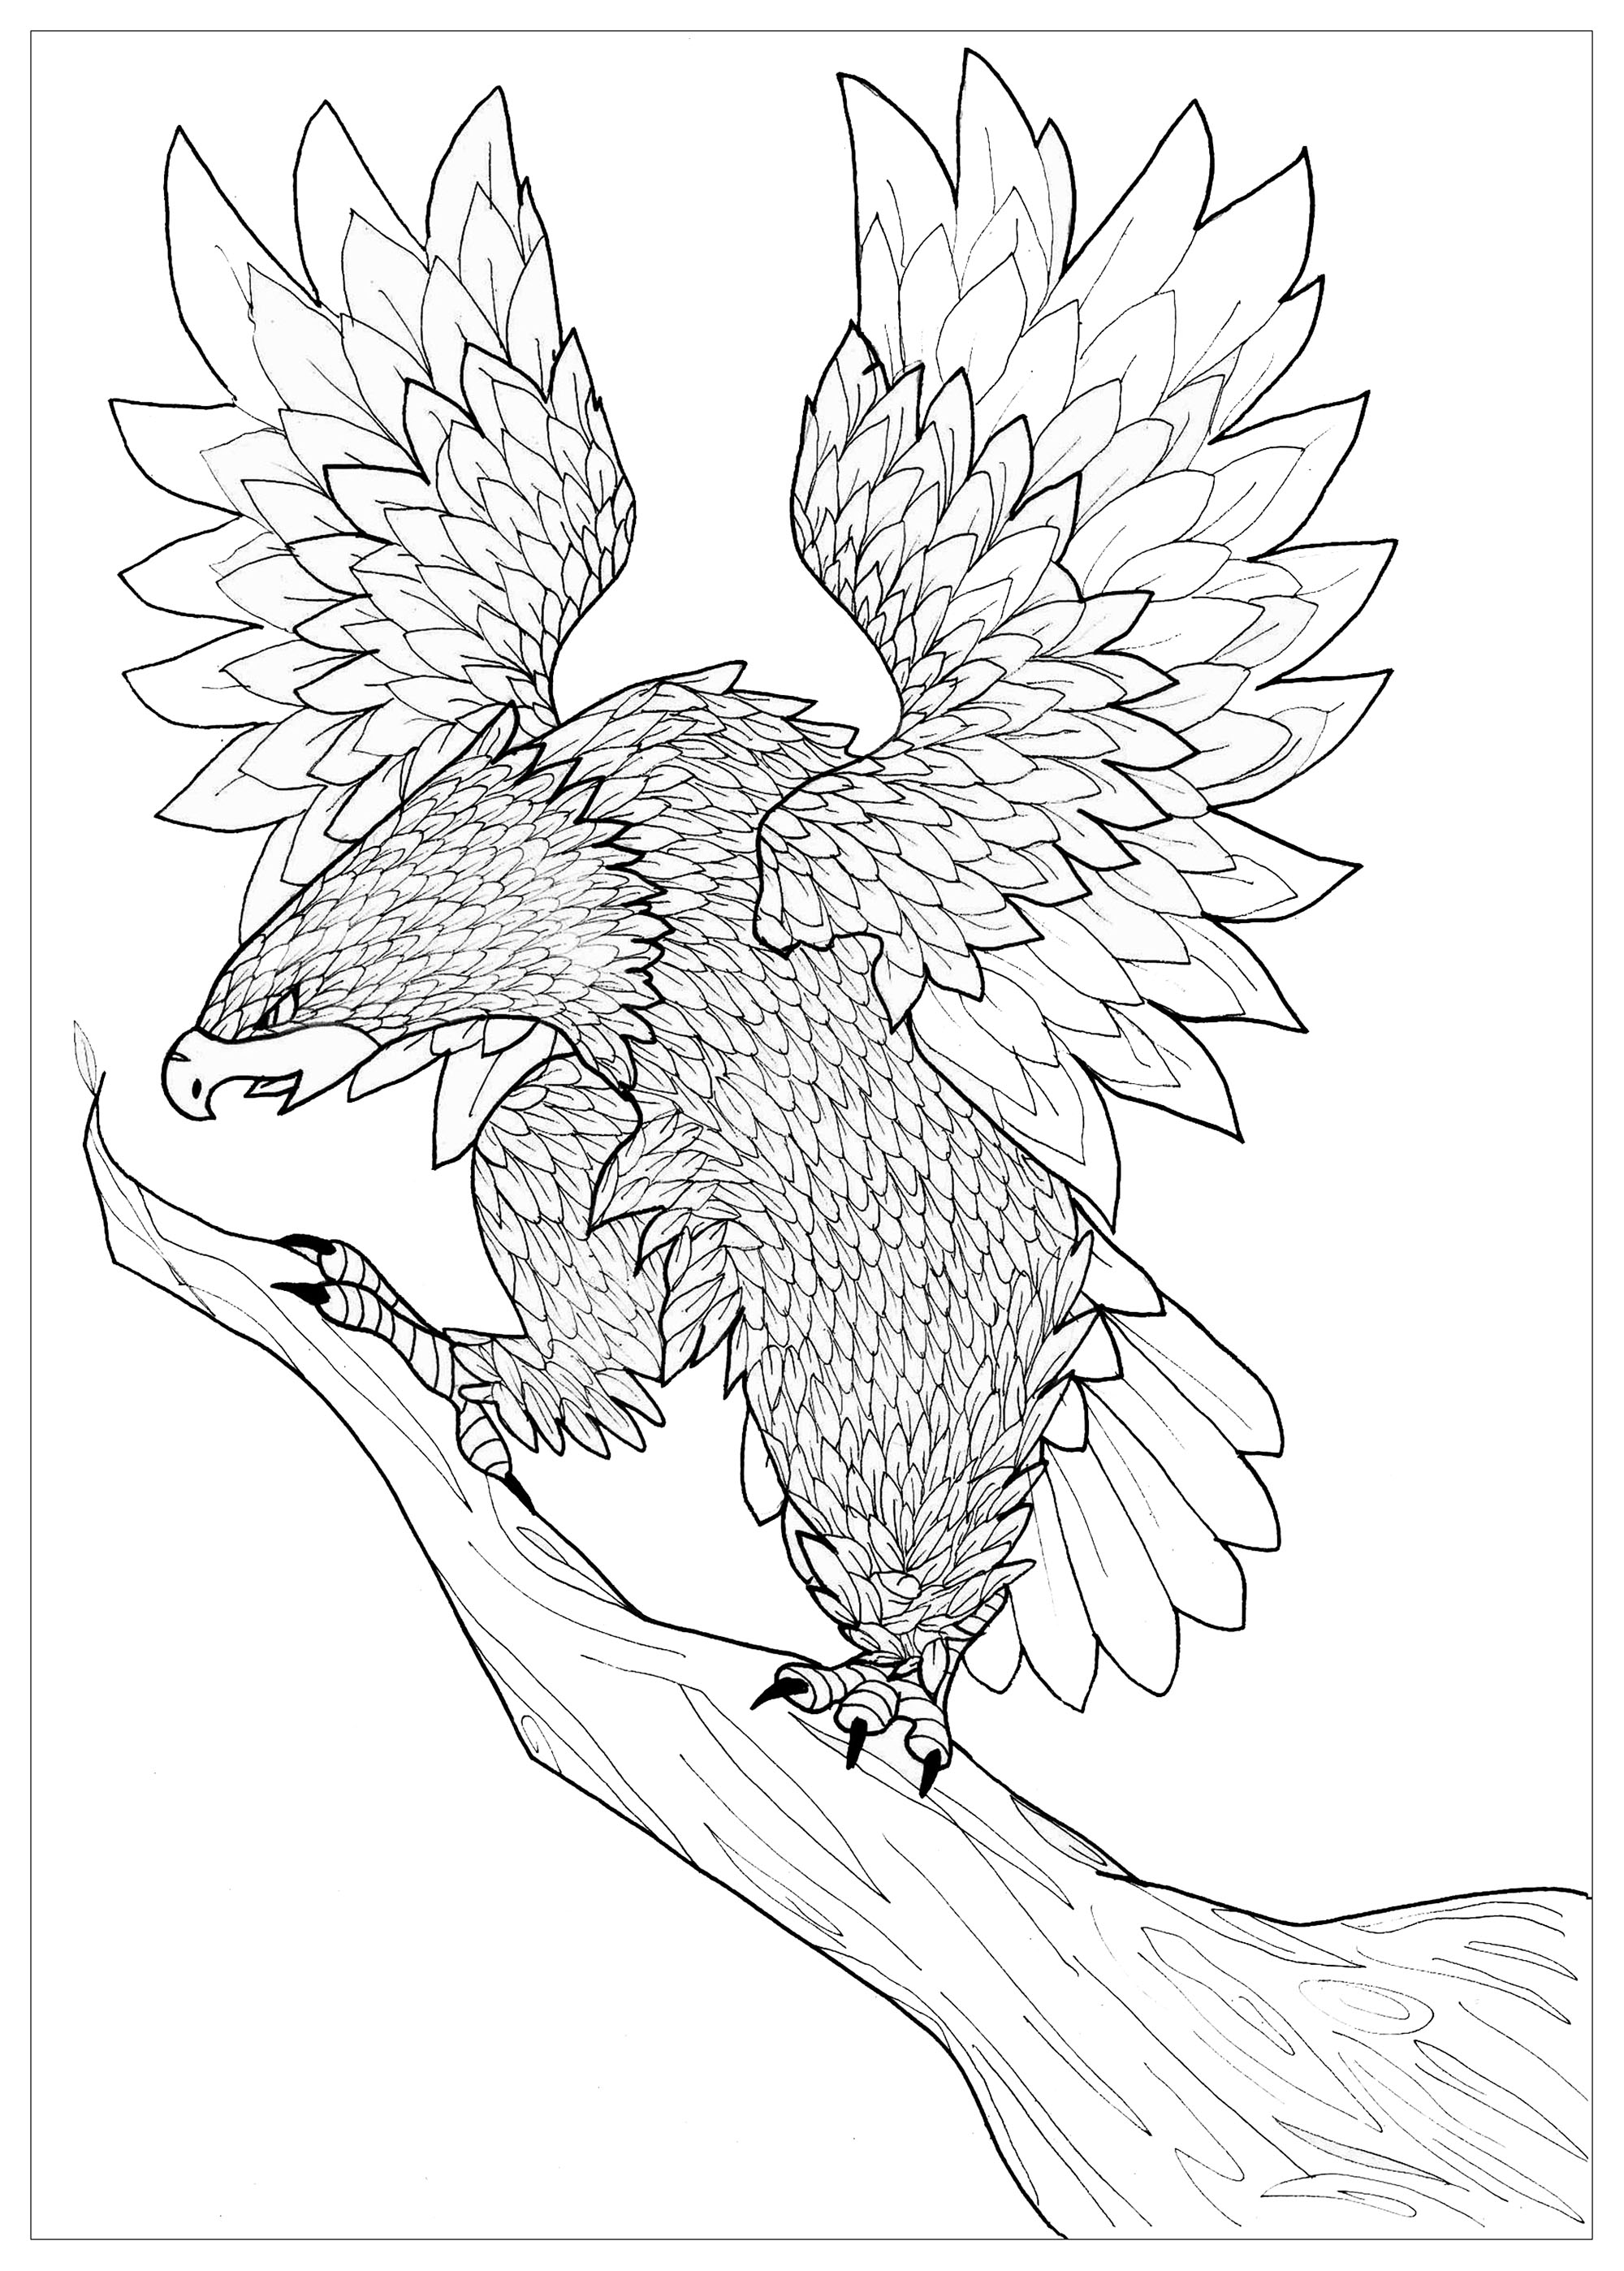 Download Eagle - Birds Adult Coloring Pages